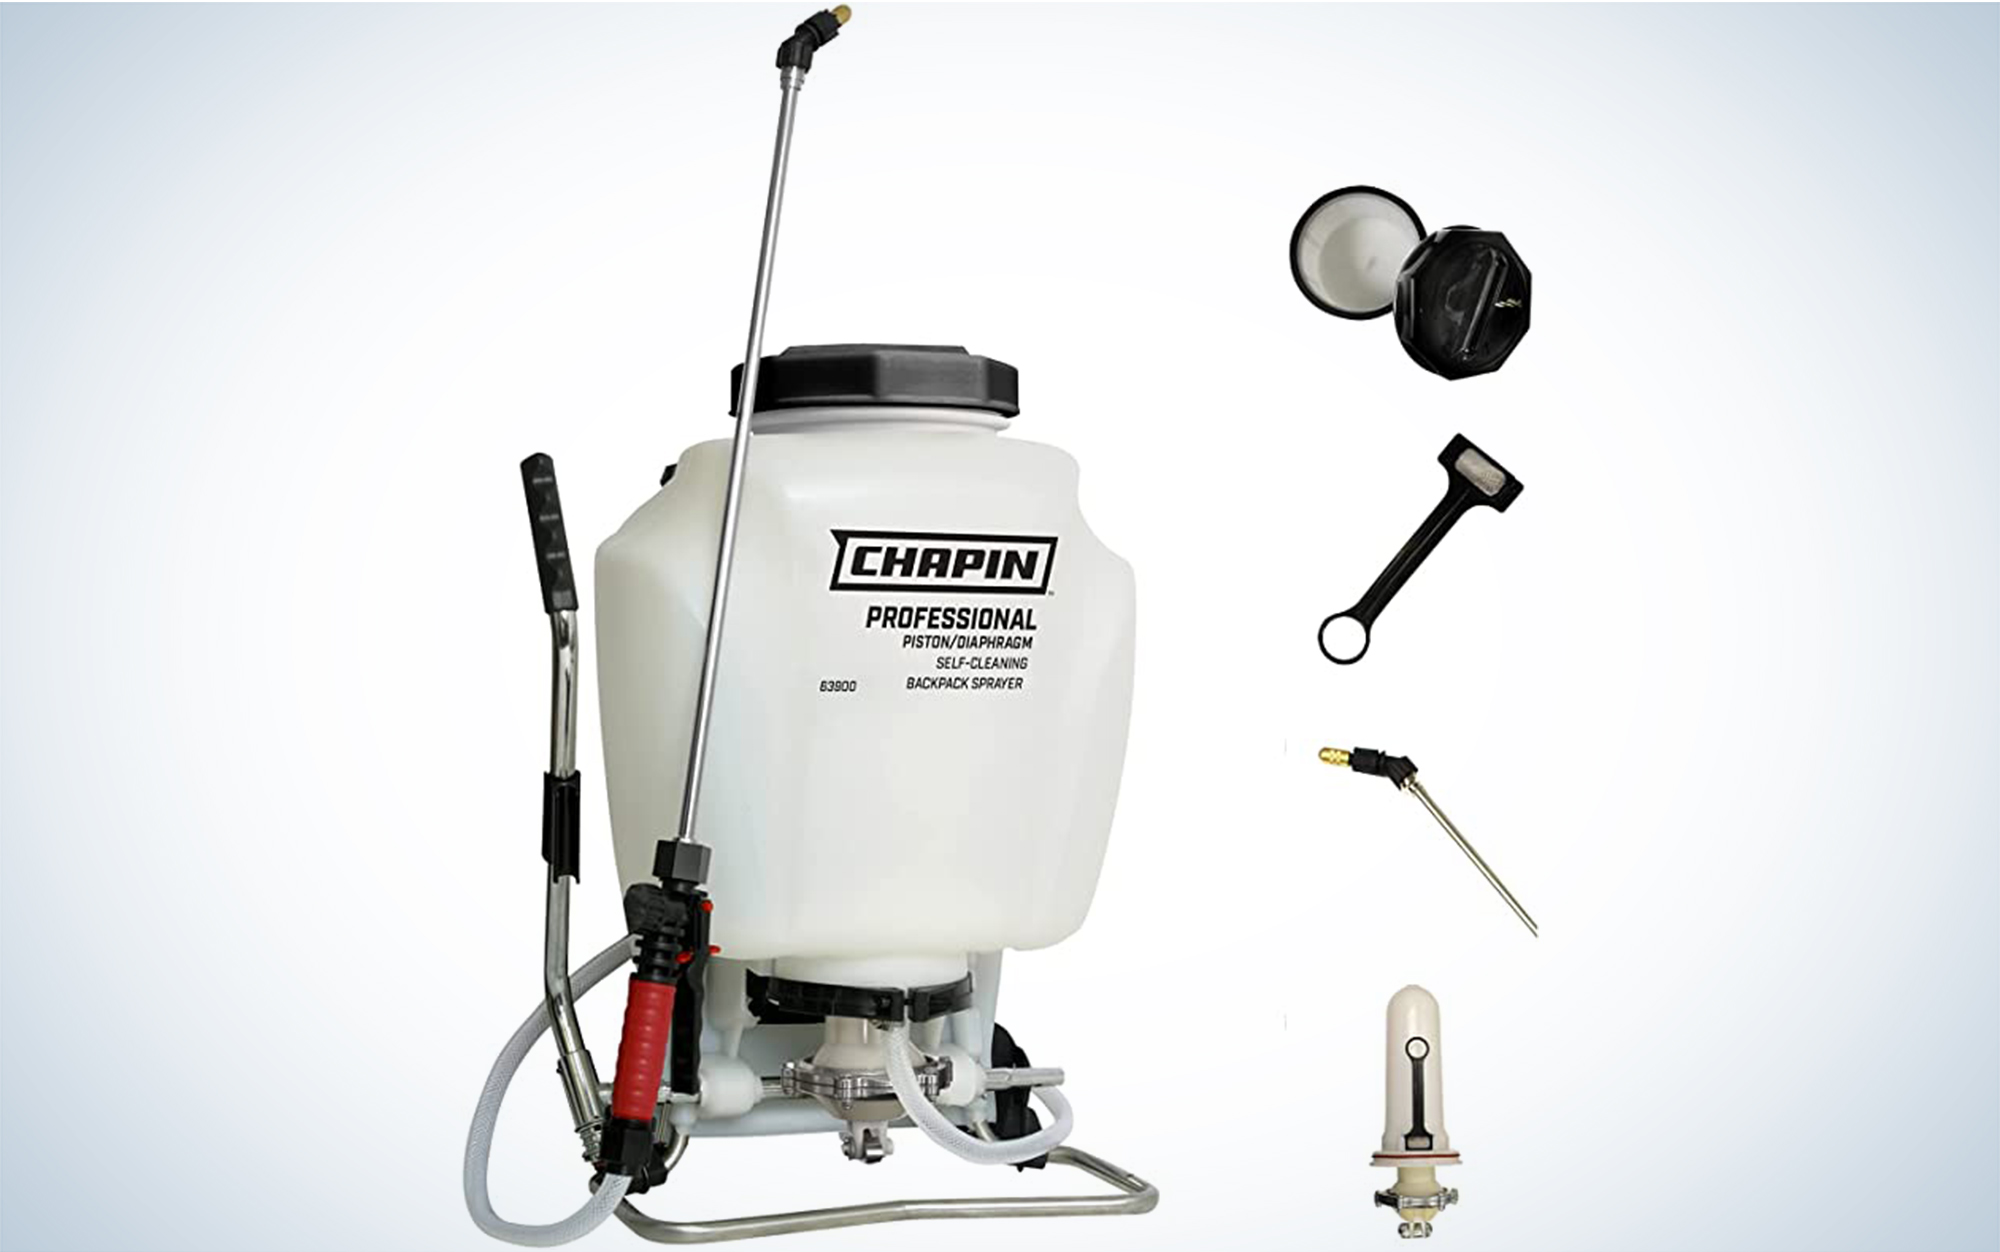 The Chapin 63900 4-Gallon JetClean Self-Cleaning Backpack Sprayer is the best self-cleaning.